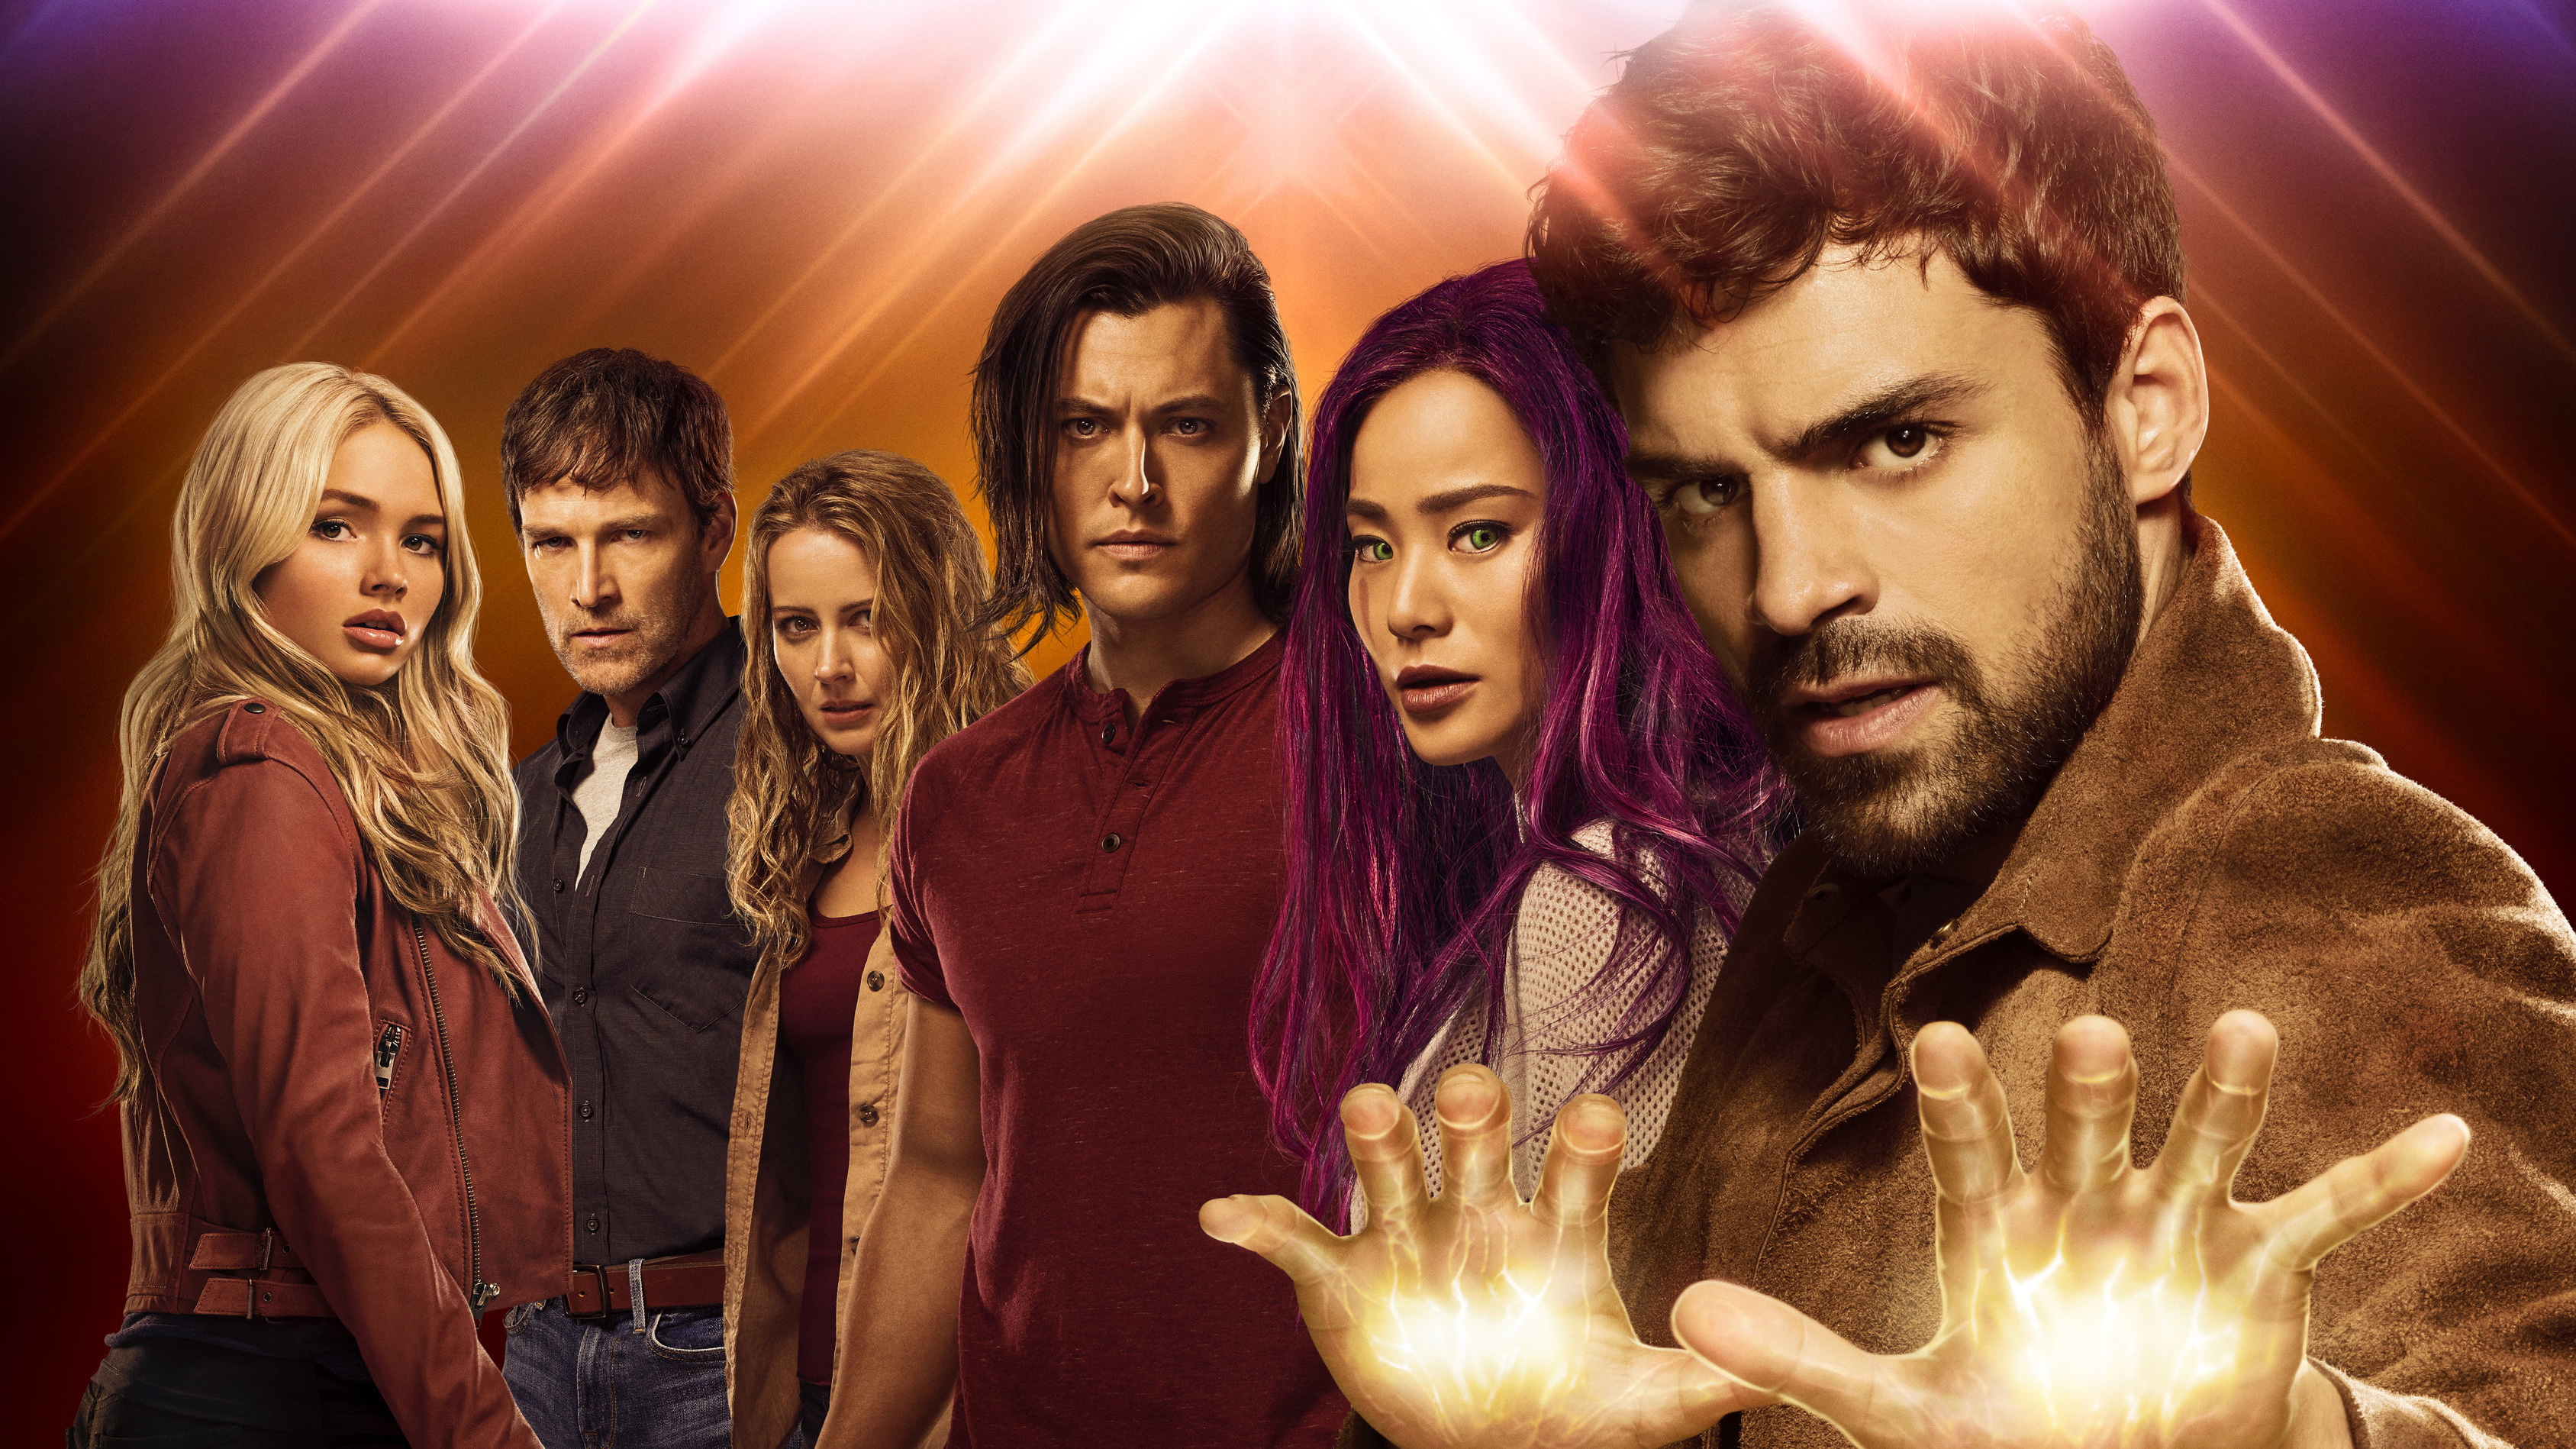 The Gifted Wallpapers